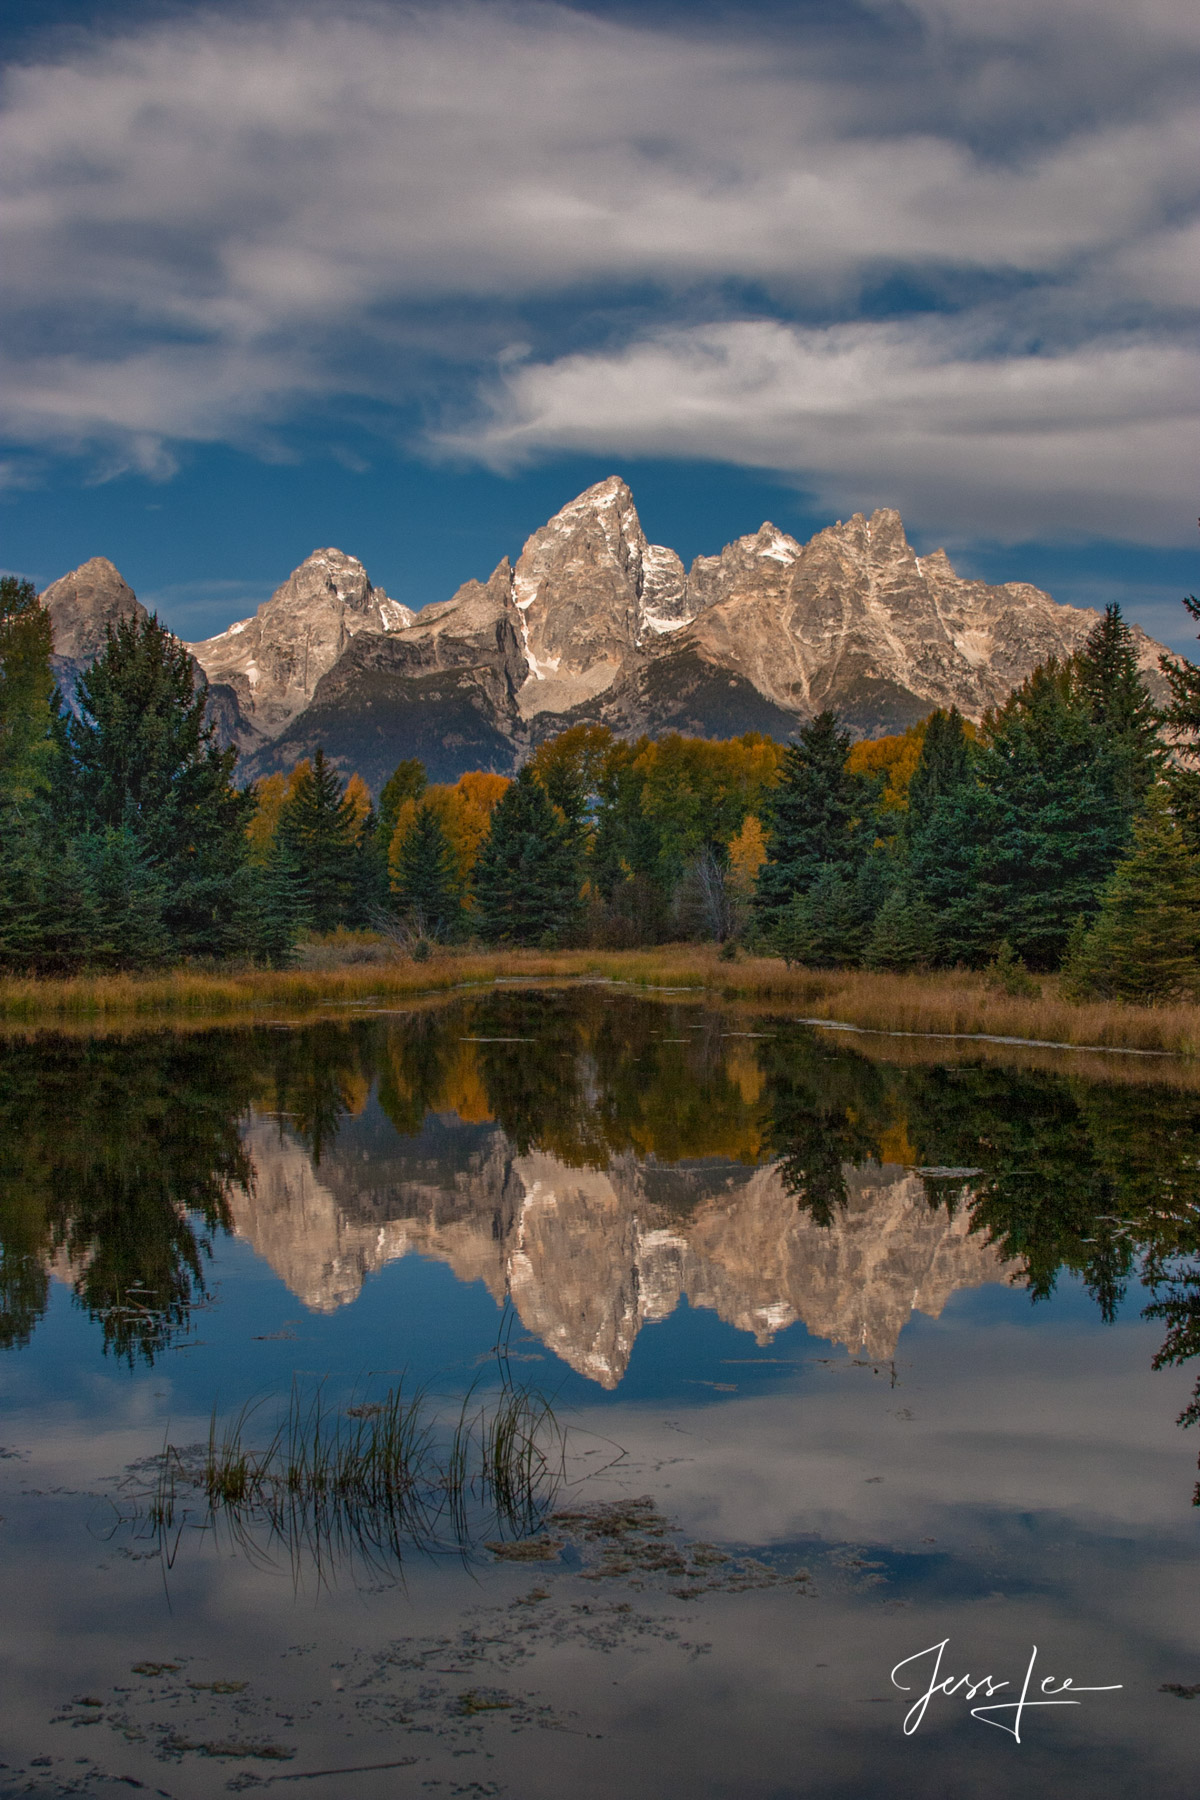 Limited Edition of 50 Exclusive high-resolution Museum Quality Fine Art Prints of Vertical Teton Landscapes. Photos copyright...